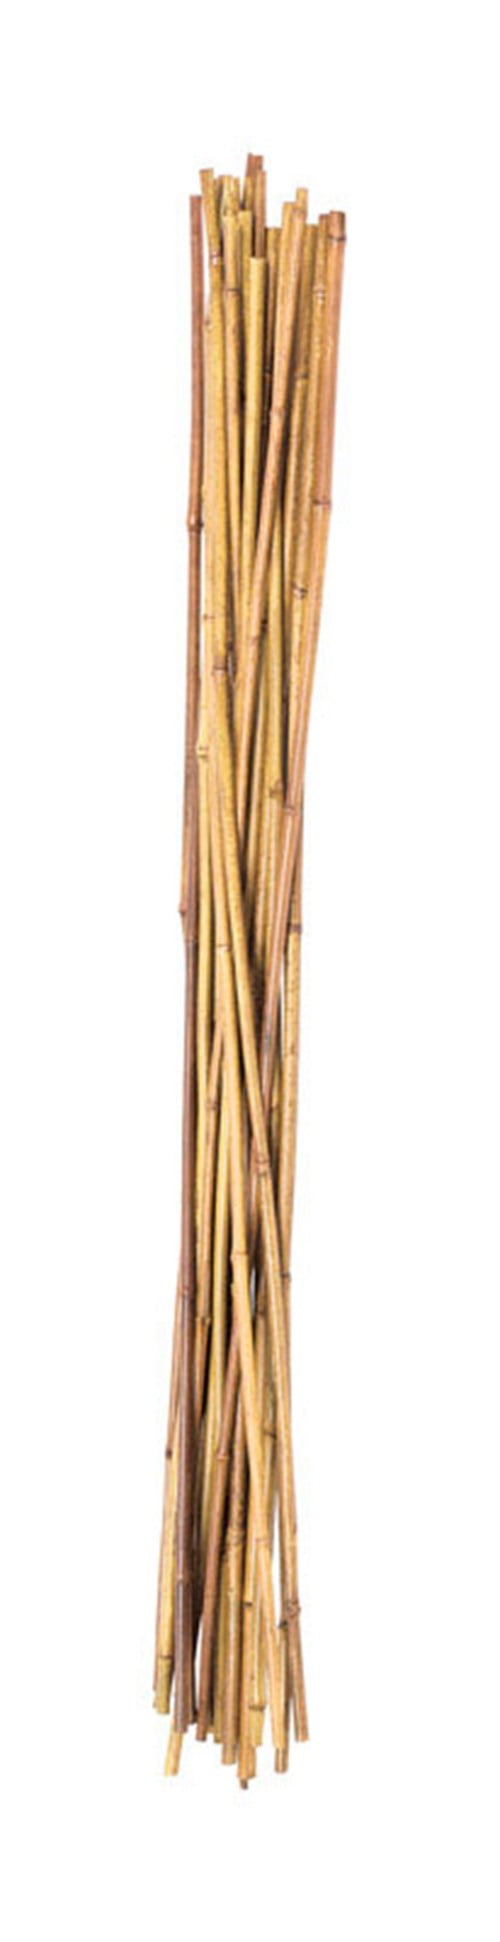 packages Panacea 89783  24 count  36" Natural Bamboo Garden Stakes 6